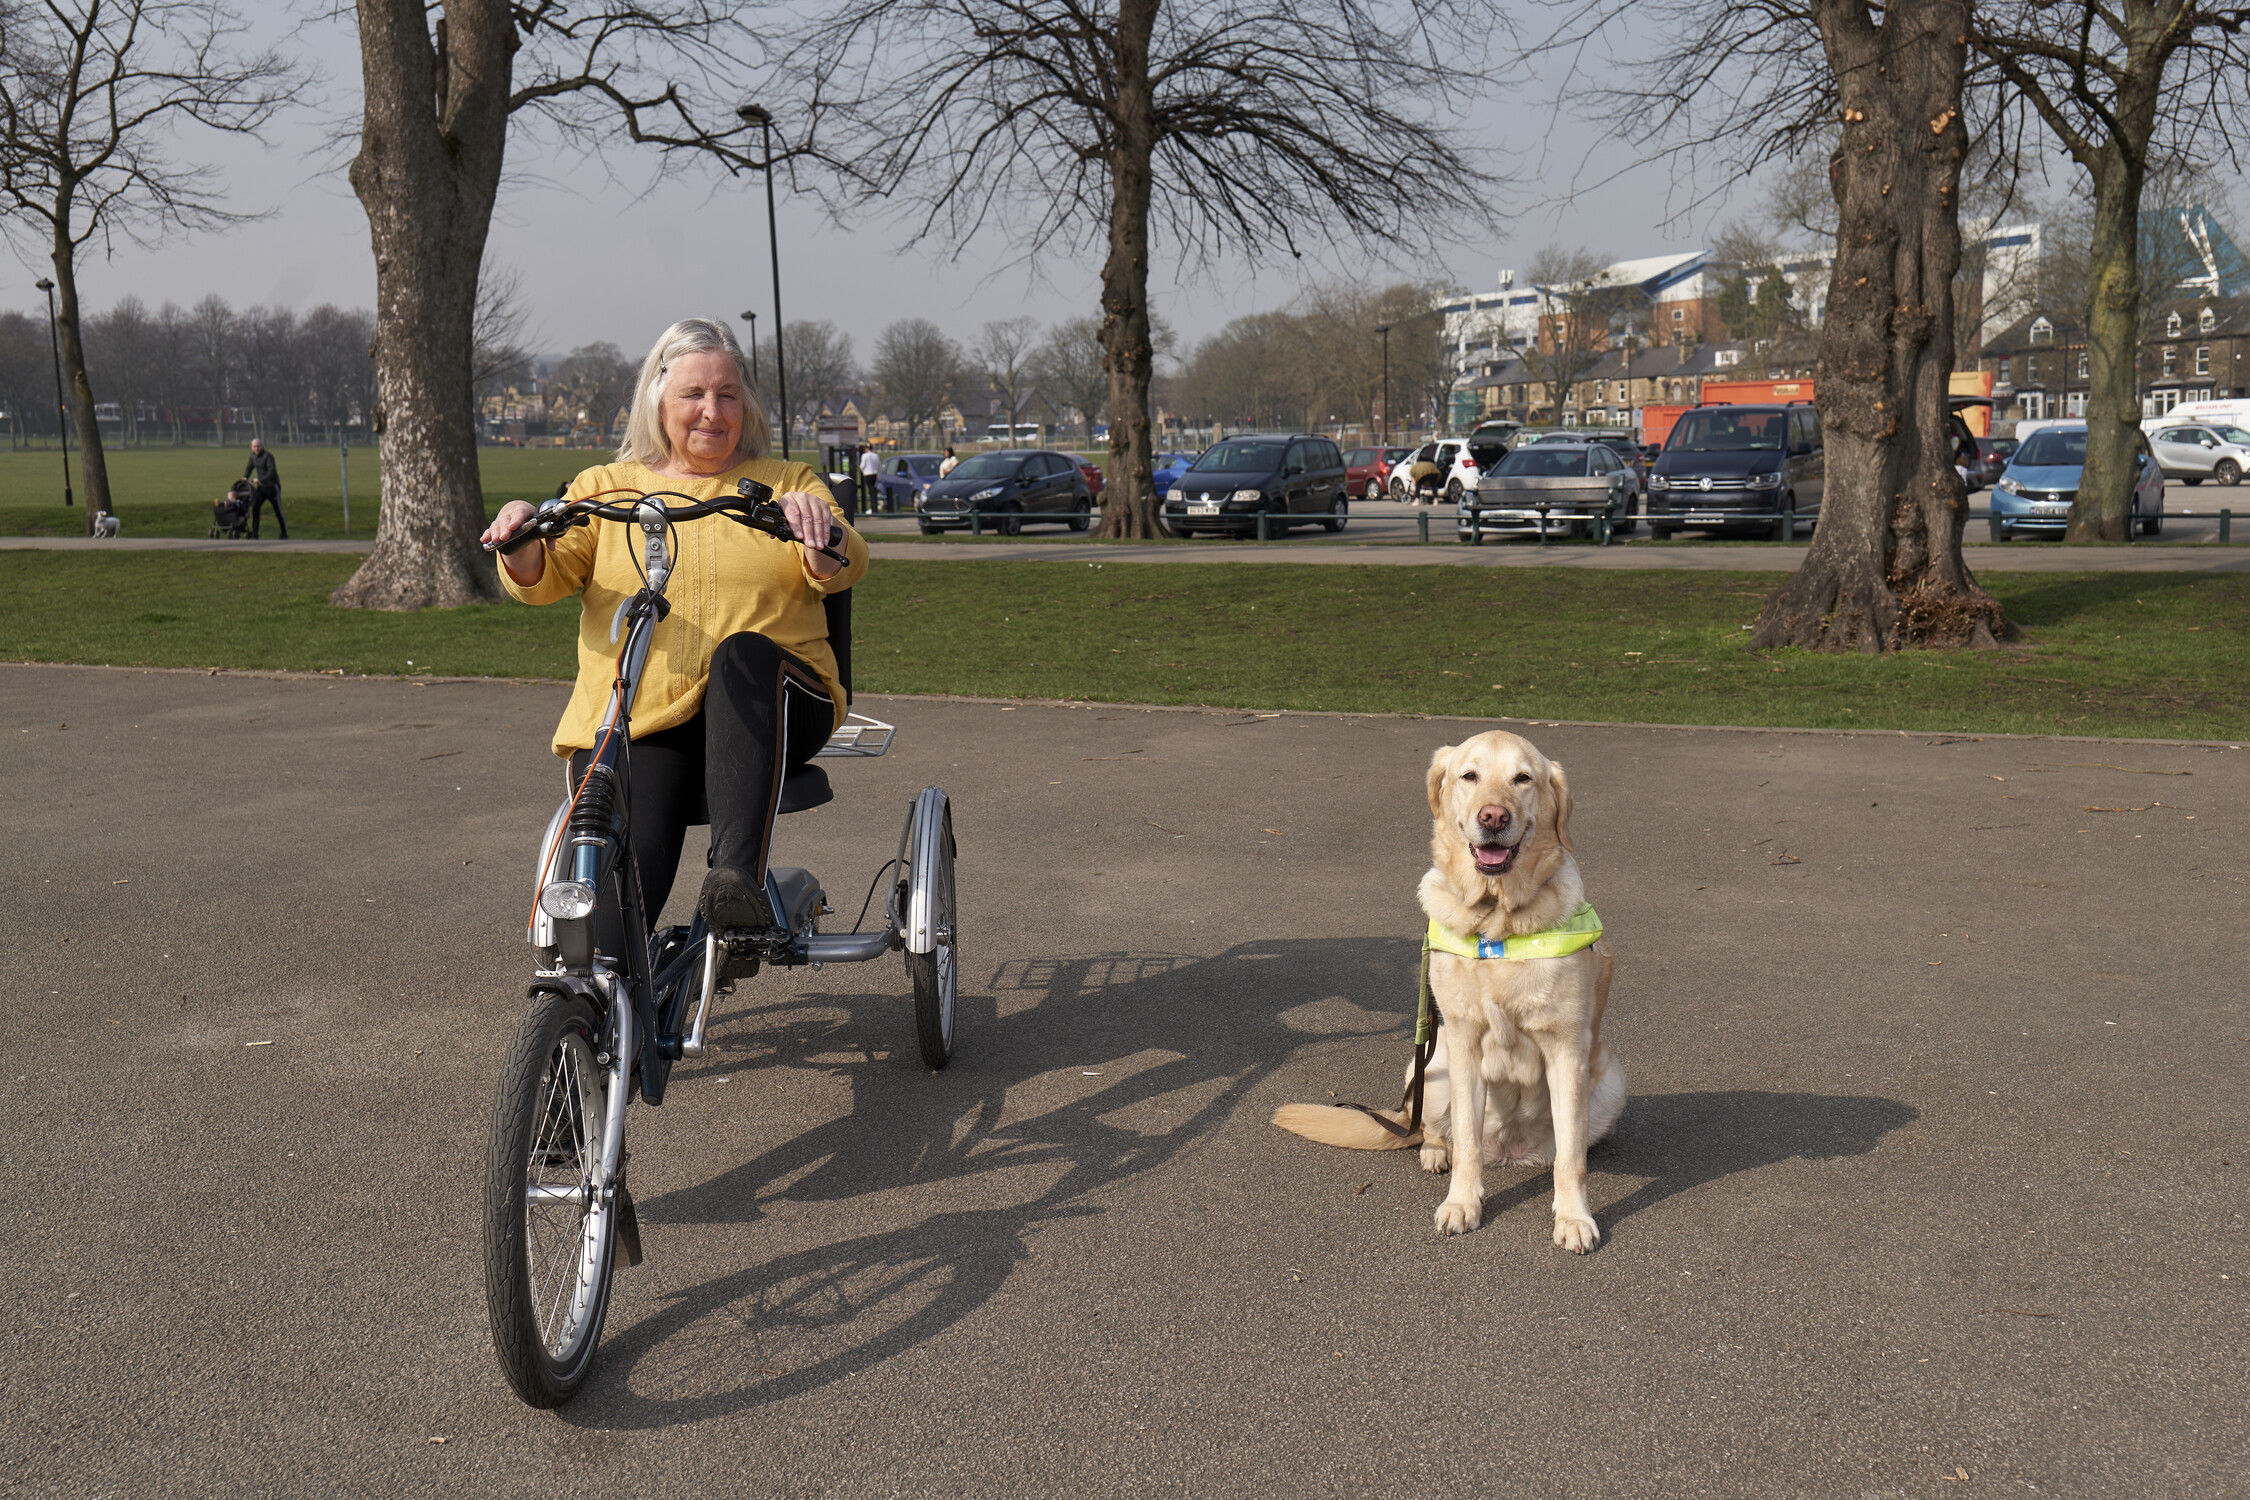 Older woman wearing yellow top and black trousers is sitting on a tricycle and there is a guide dog on the right sat on the floor